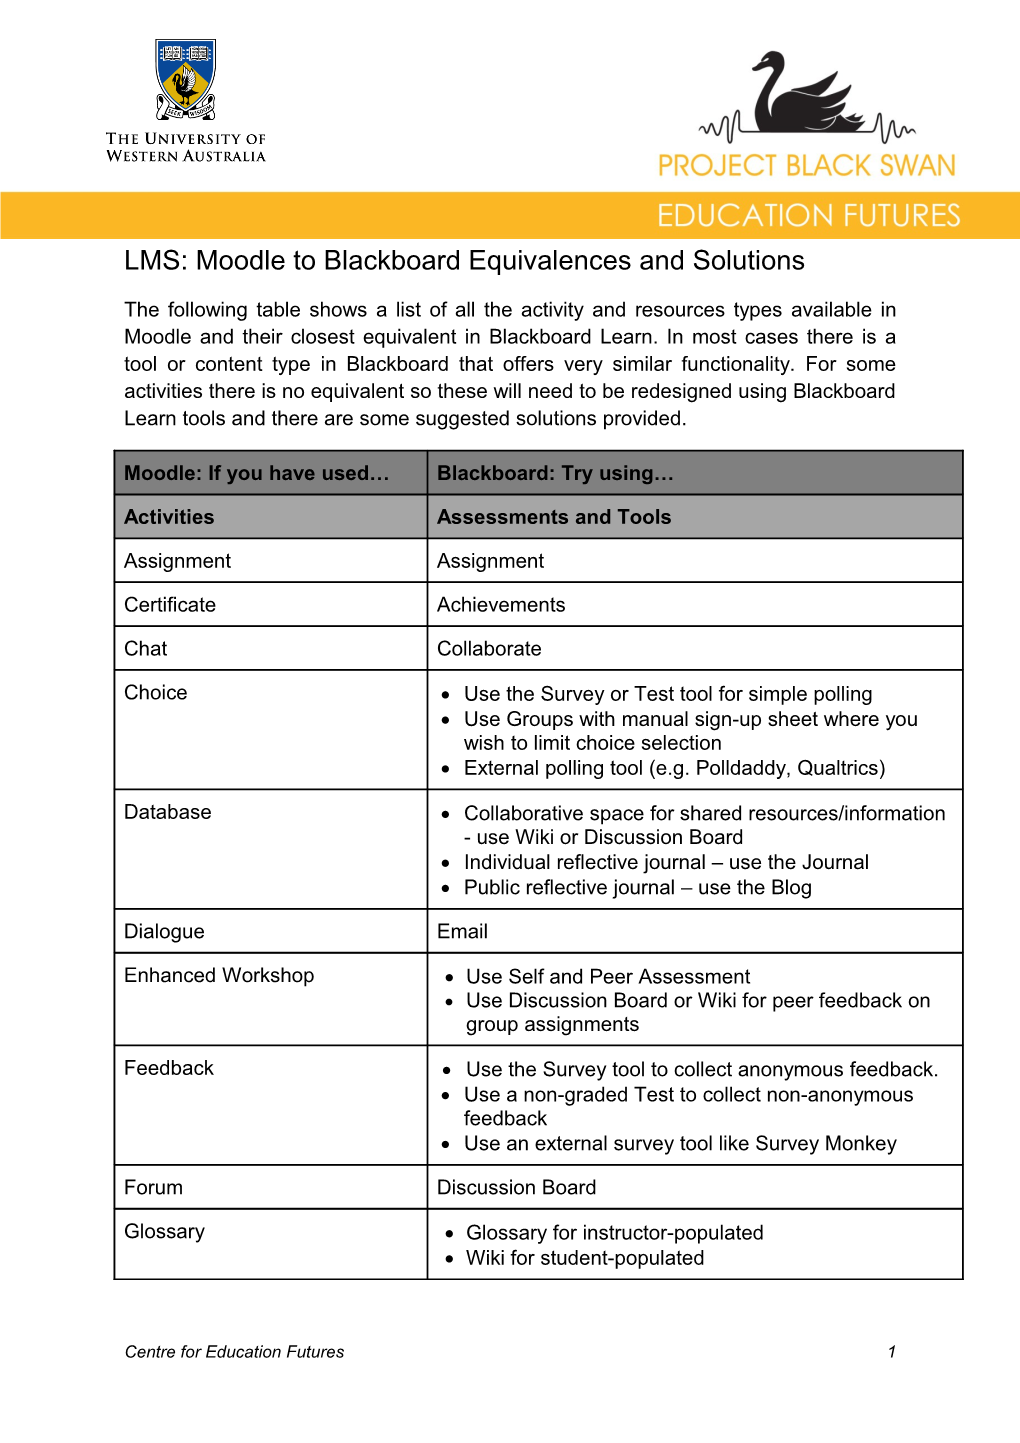 LMS: Moodle to Blackboard Equivalences and Solutions